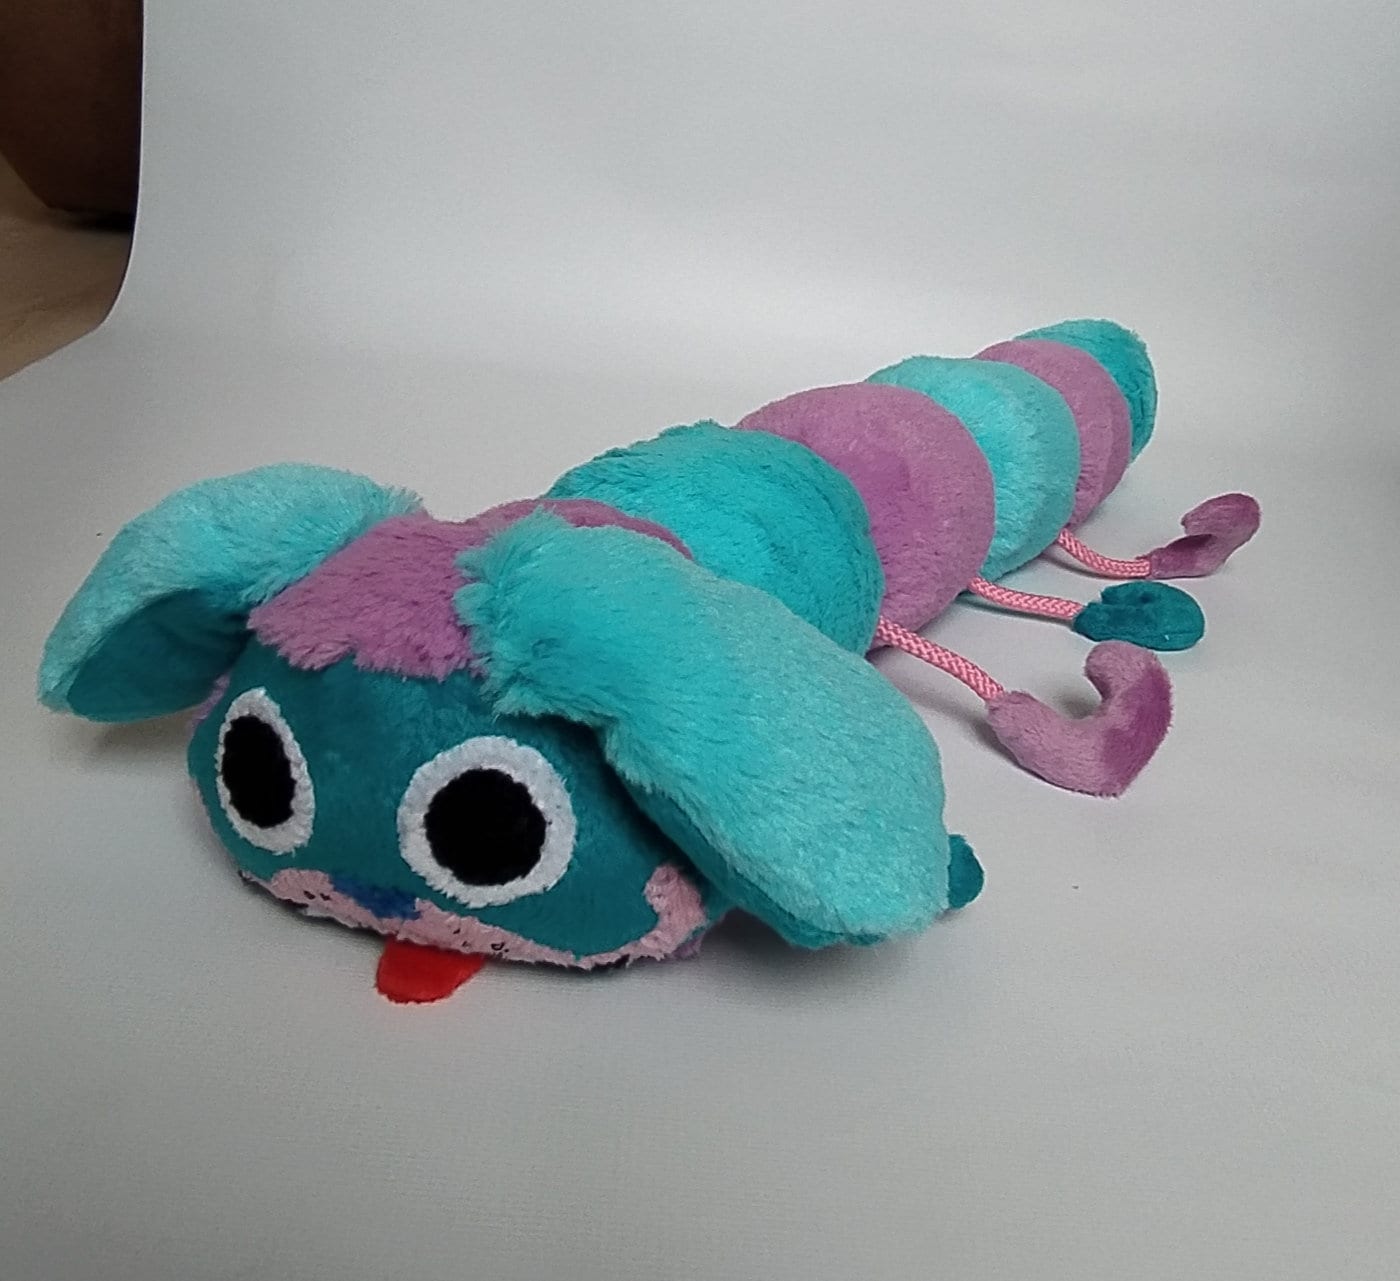 LEYING Toys [Fast shipping] Poppy Playtime Caterpillar Plush Doll Huggy  Wuggy Soft Stuffed Plush Toy Gifts For Kids Fans